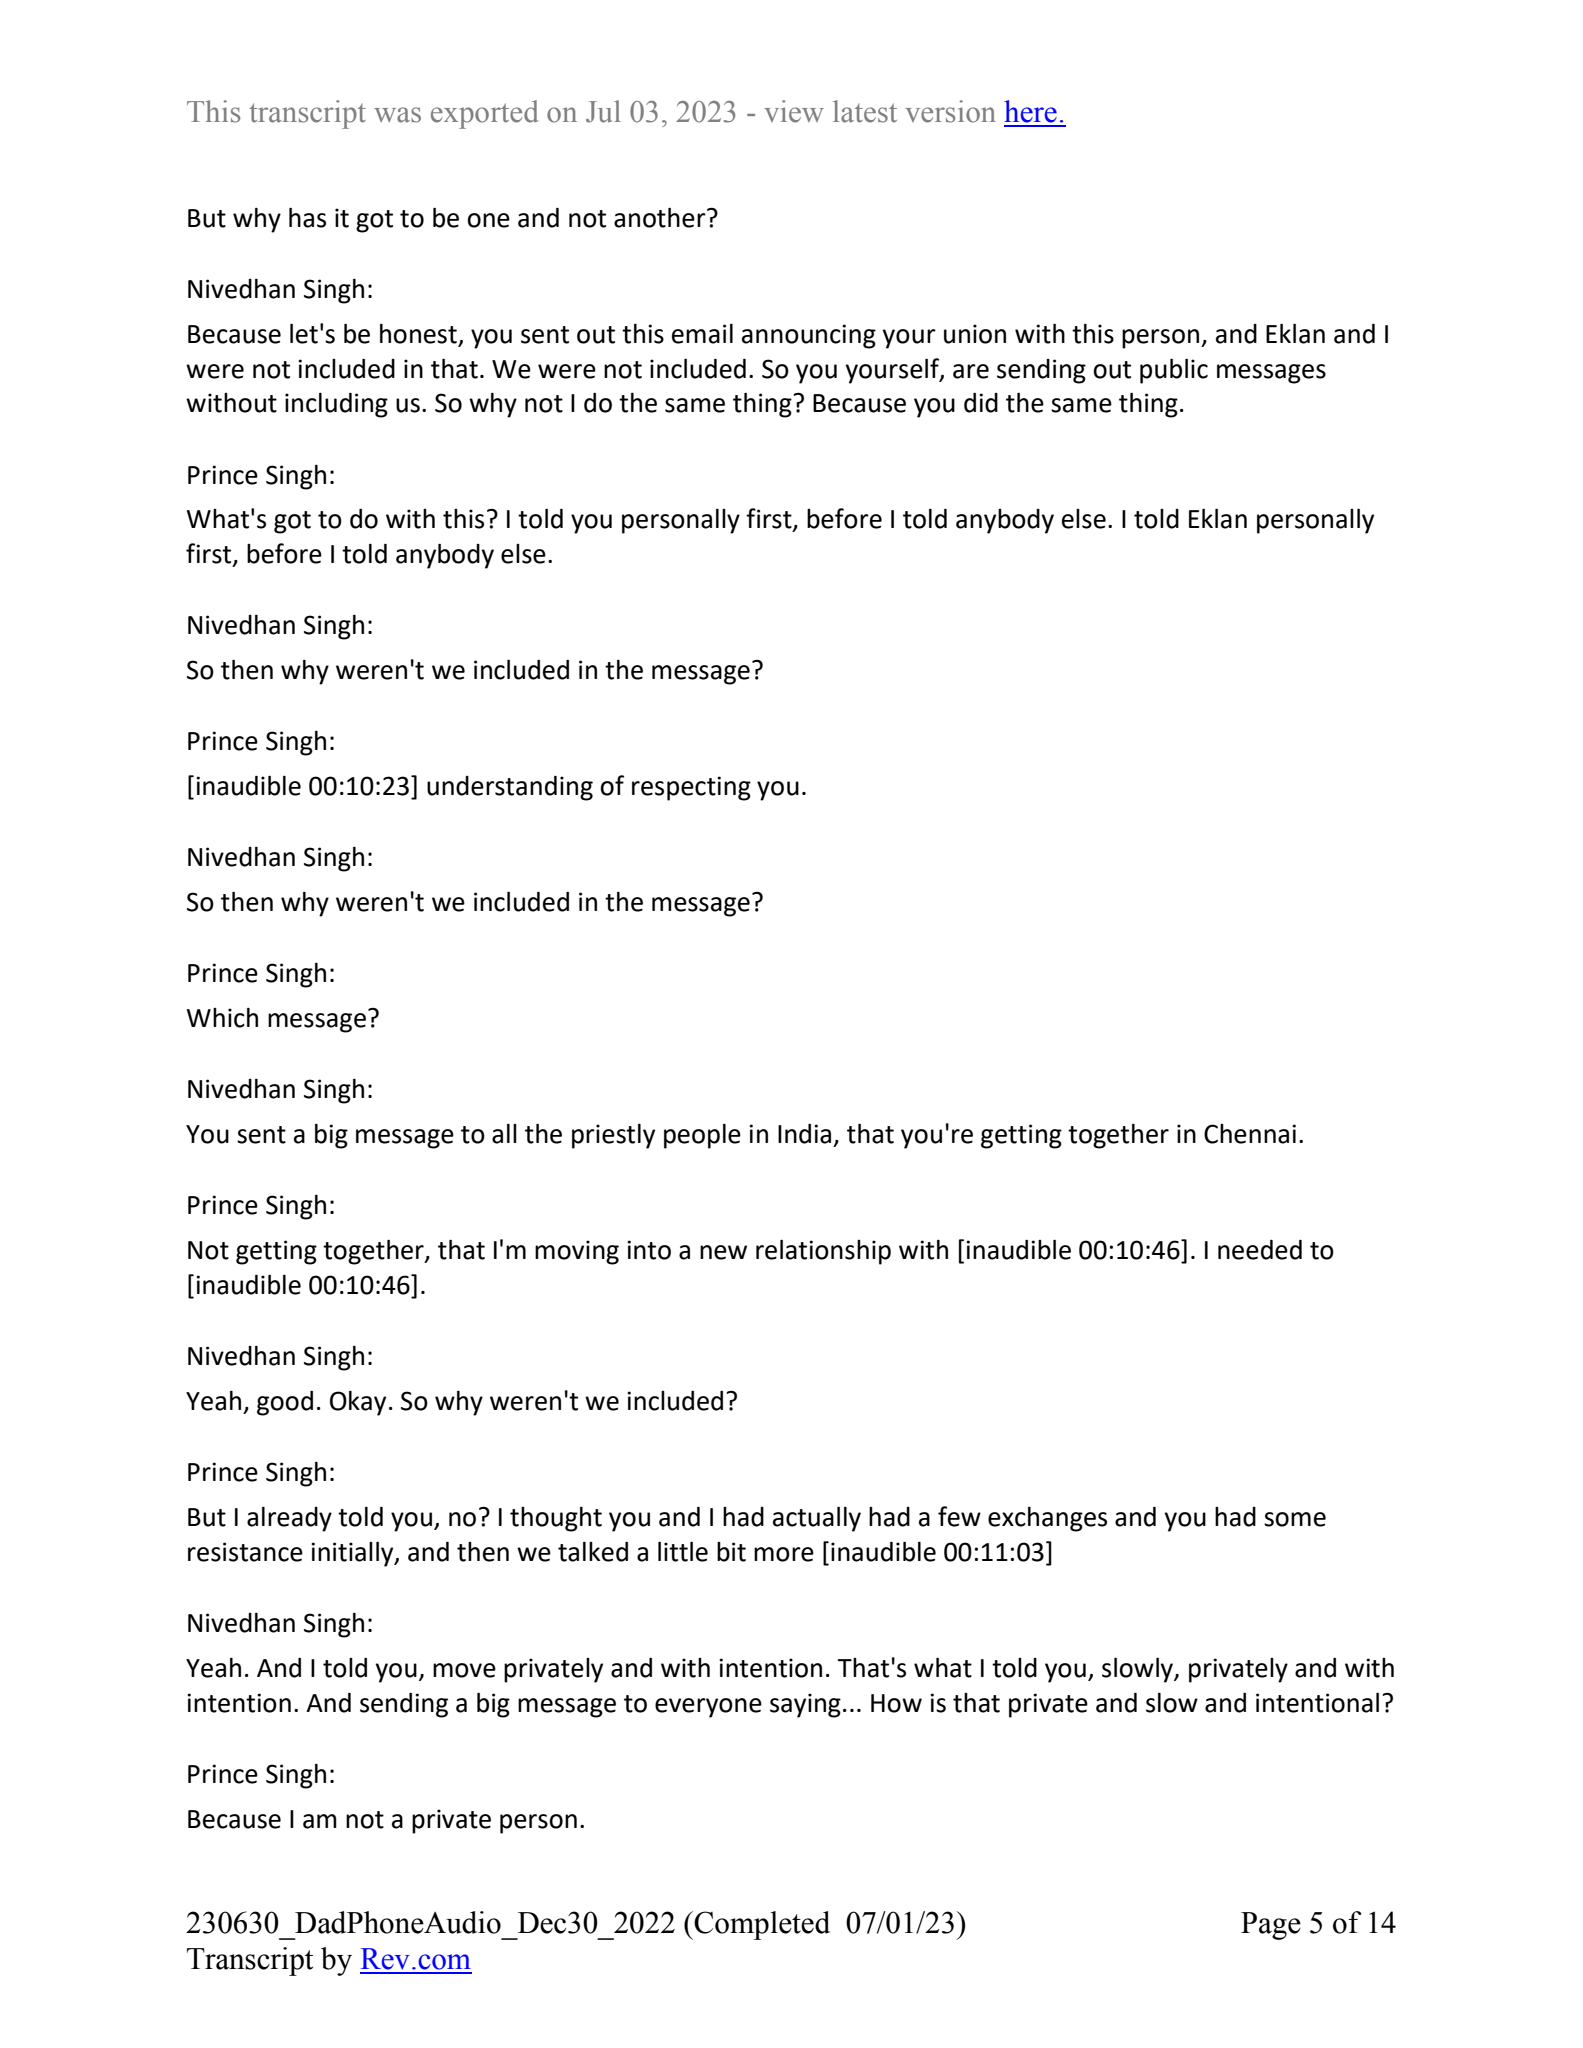 December 30th, 2022 phone call transcript - Page 5